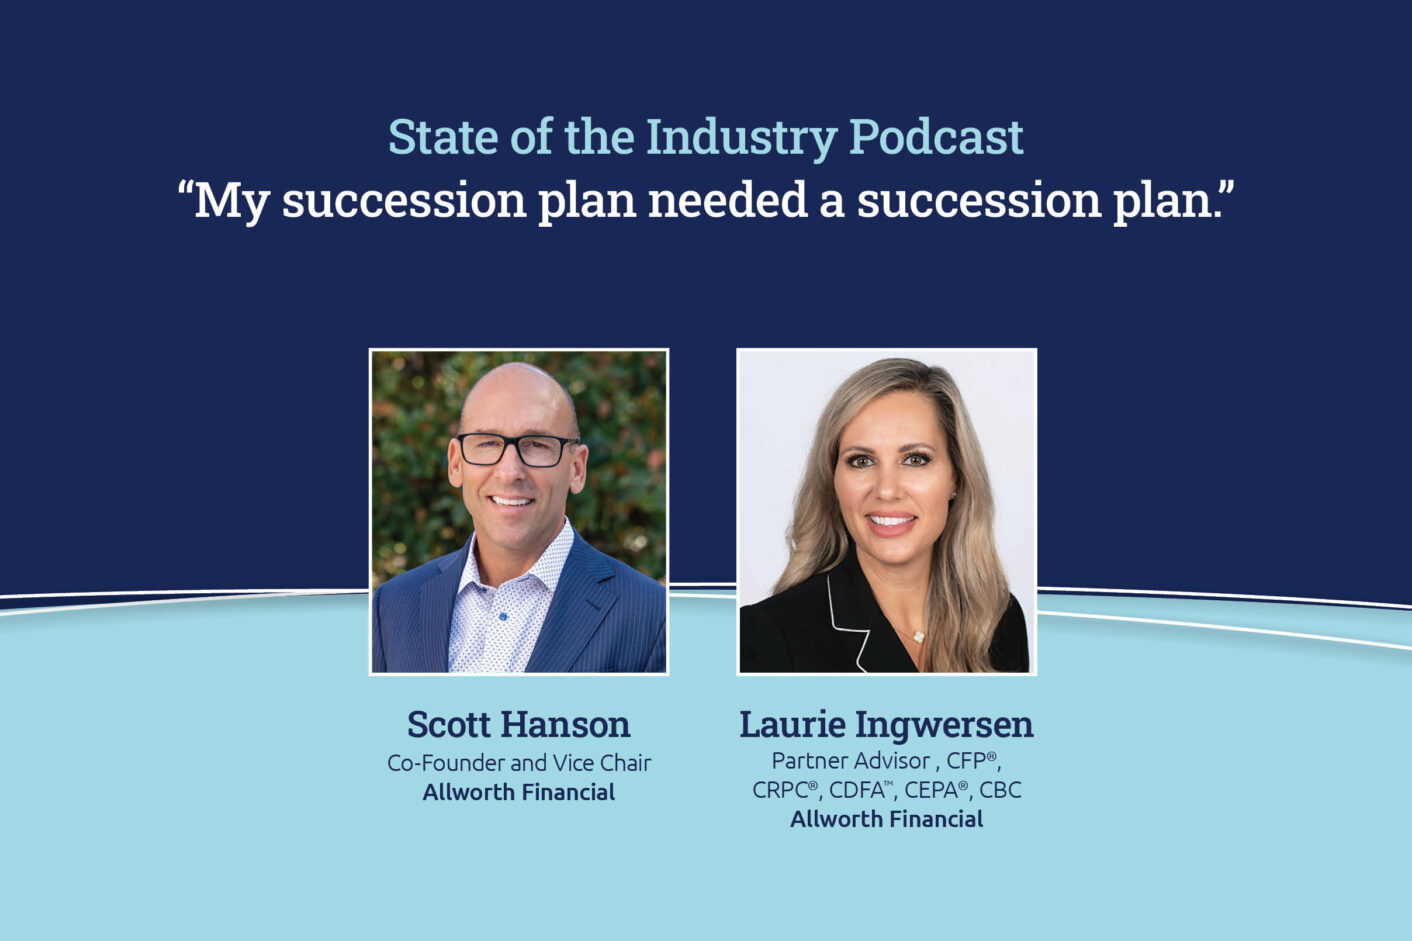 State of the industry podcast my succession plan needed a succession plan featuring allworth financial co-founder and senior partner scott hanson and Laurie Ingwersen allworth partner advisor